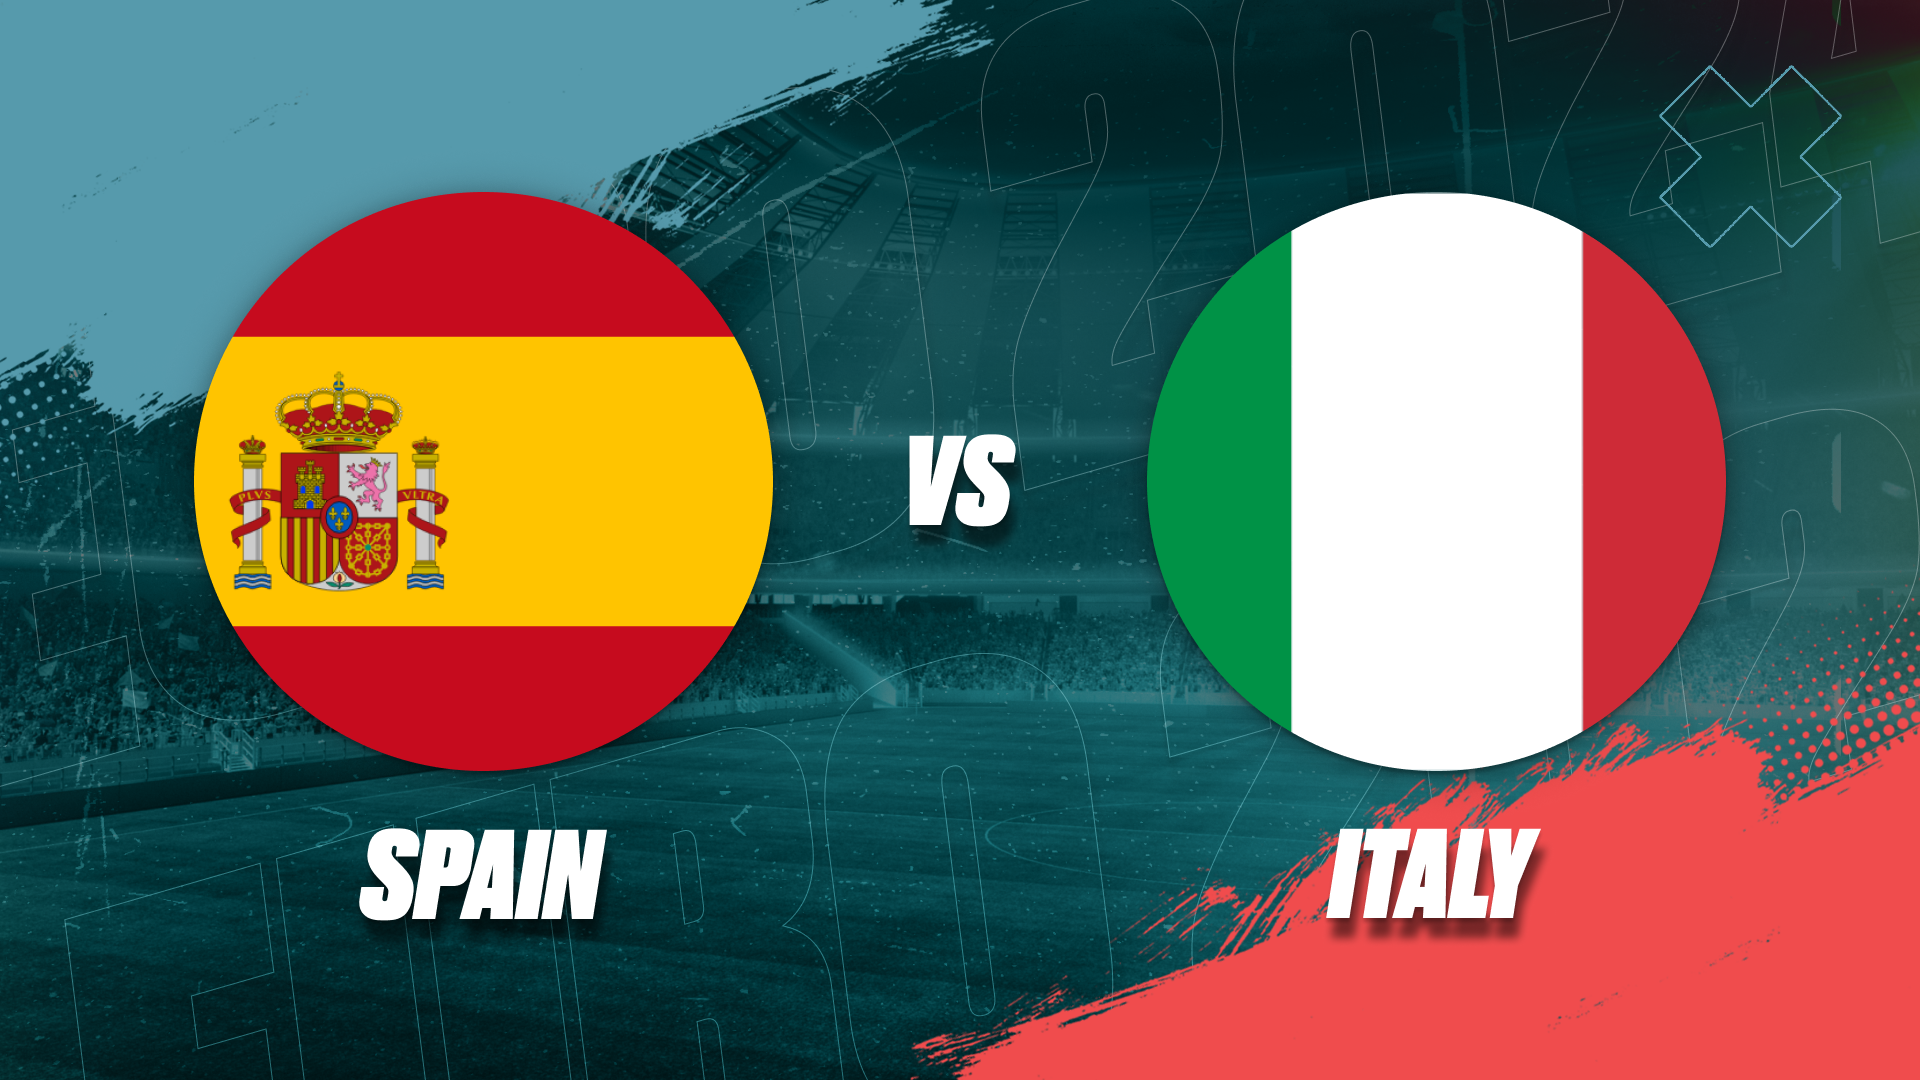 Spain Smashes Italy in impressive 1-0 victory